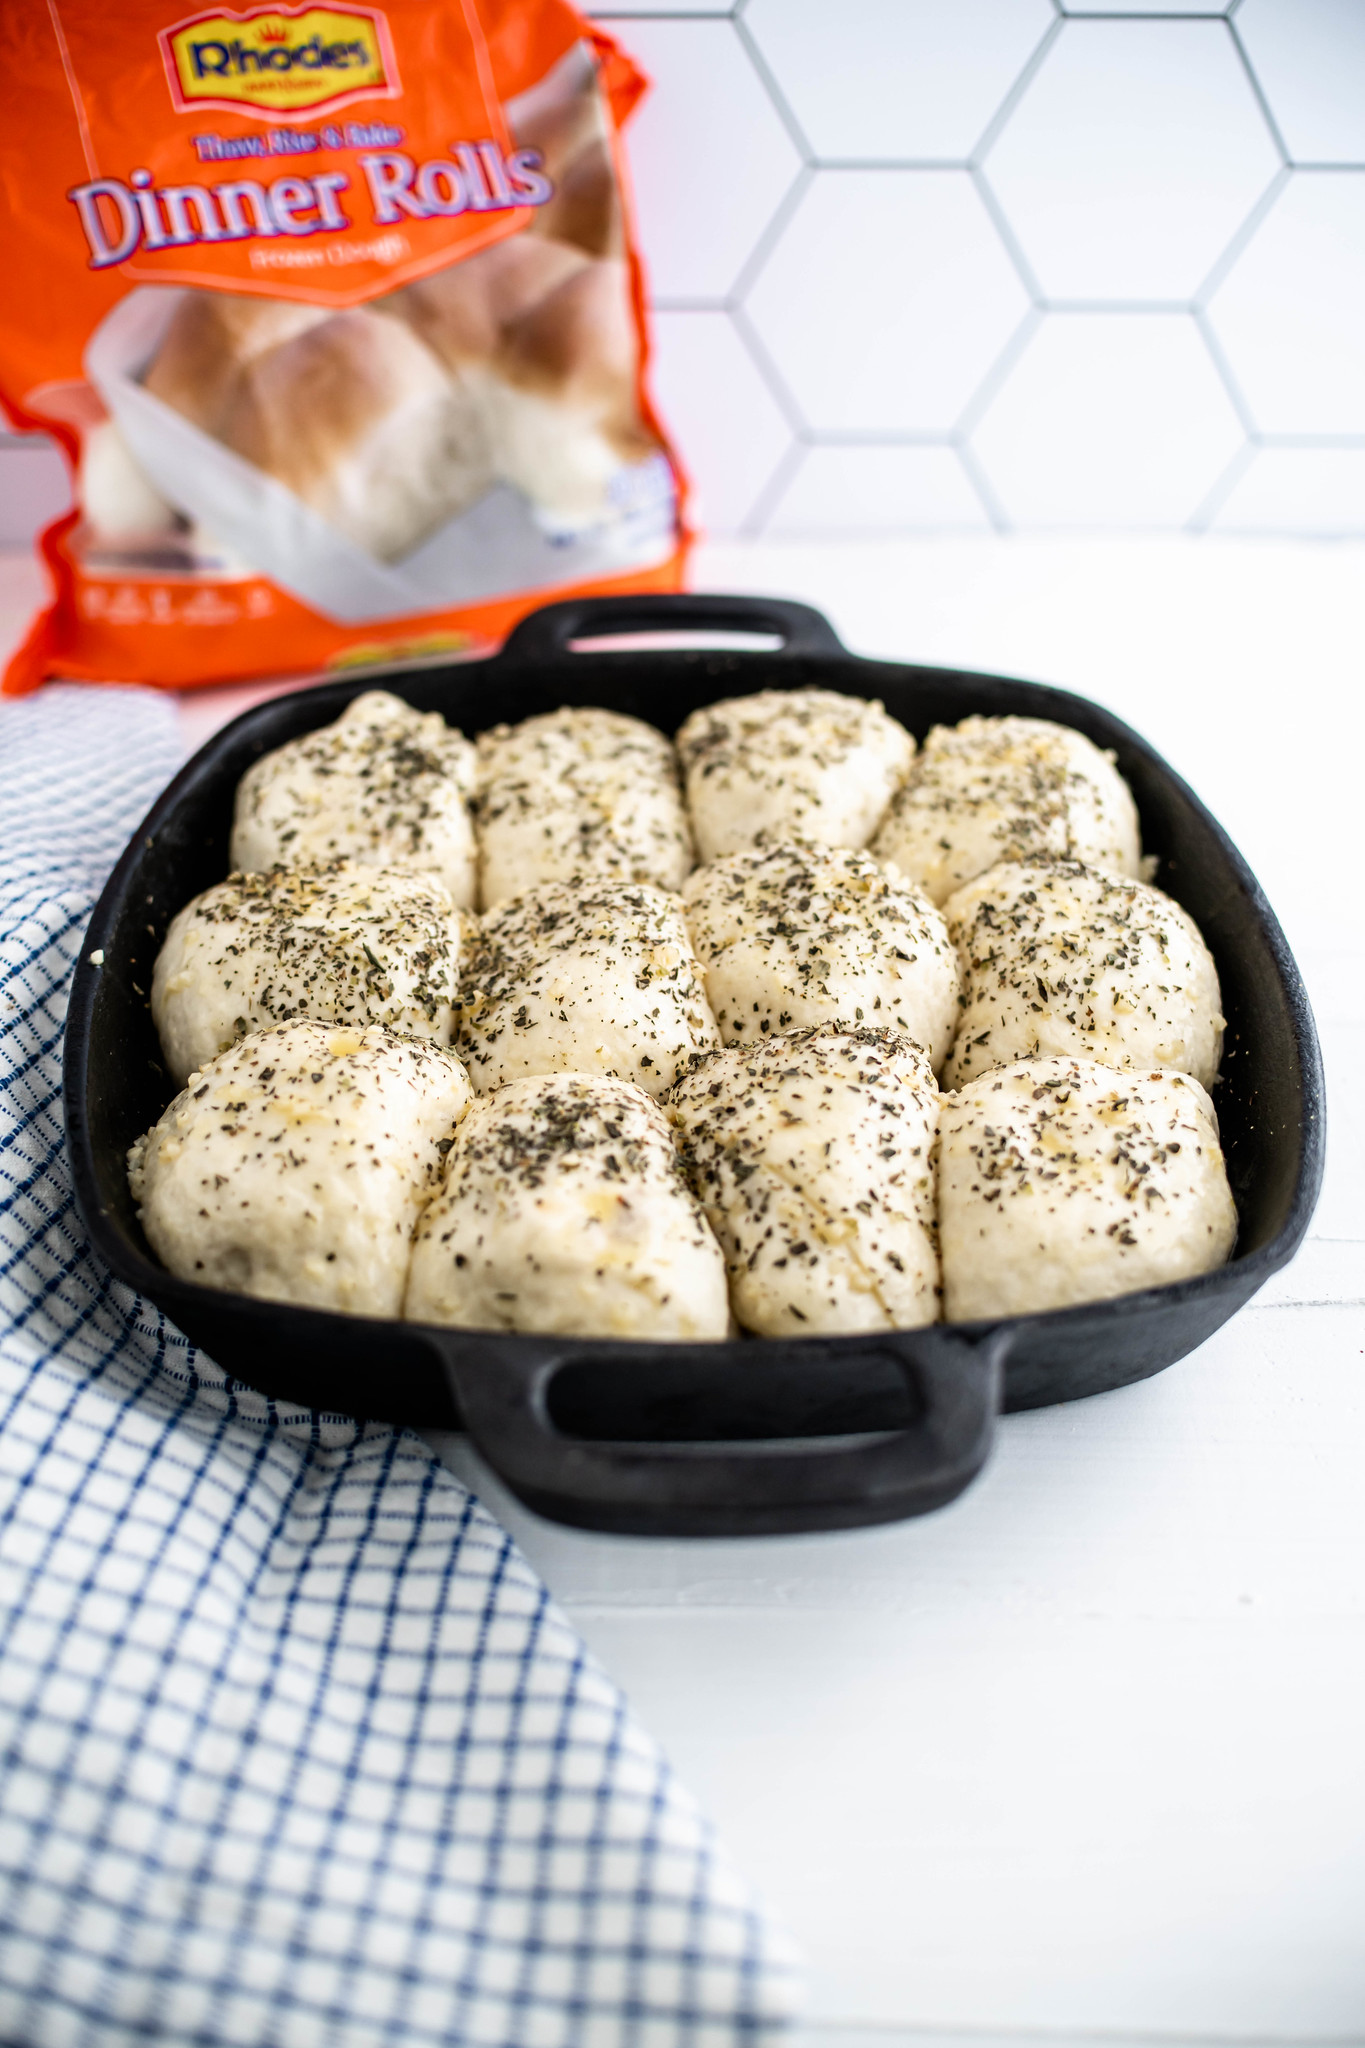 Risen rolls brushed with butter and sprinkled with Italian seasoning.